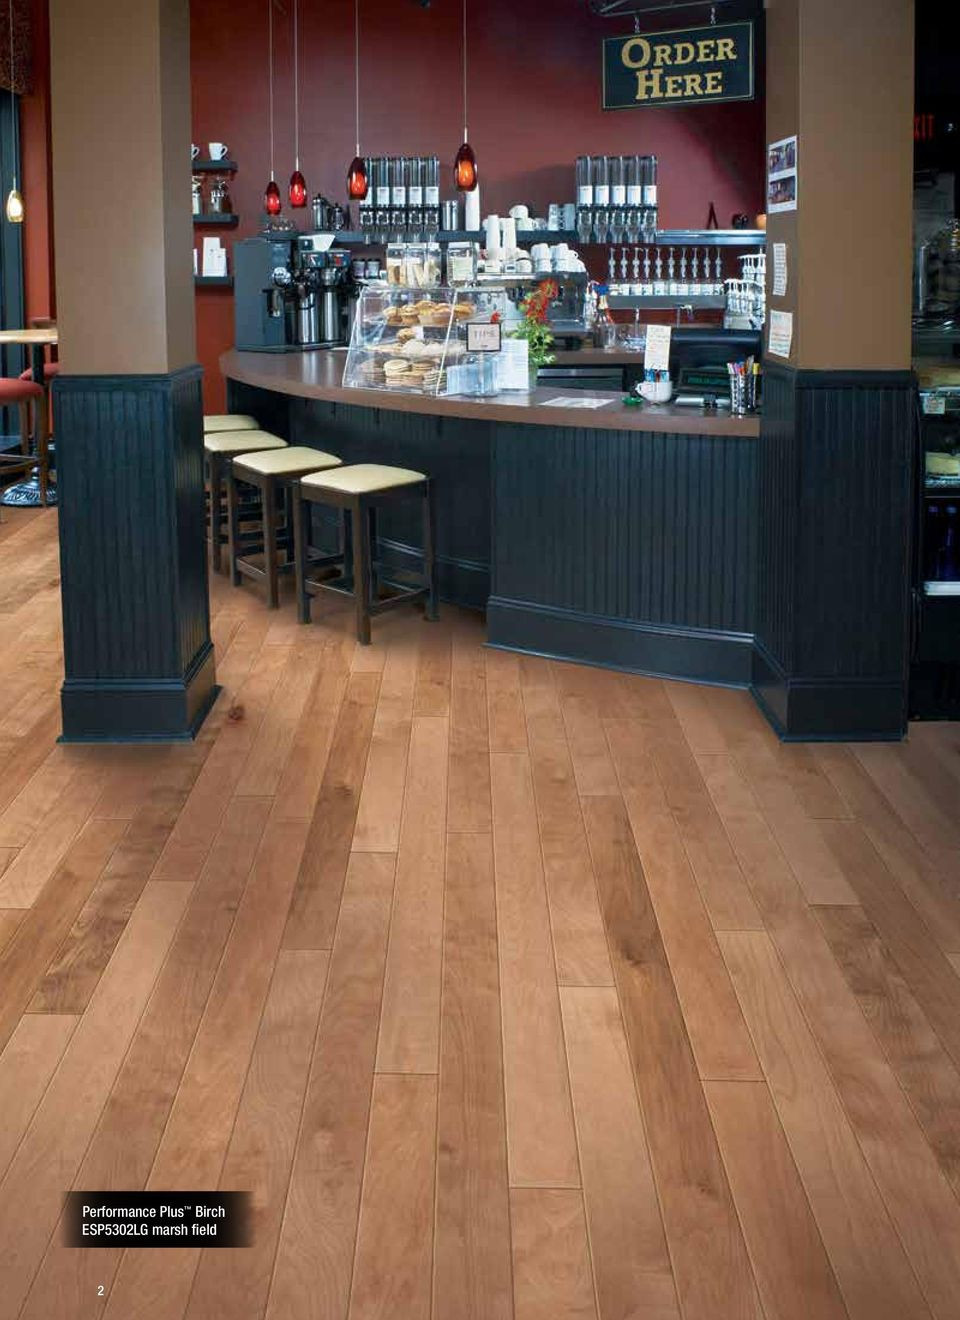 14 Recommended Hardwood Floor Tile Galleria 2024 free download hardwood floor tile galleria of performance plus midtown pdf throughout 3 crafted with an eye for detail at armstrong we ve focused on our design details for more than a century our product 